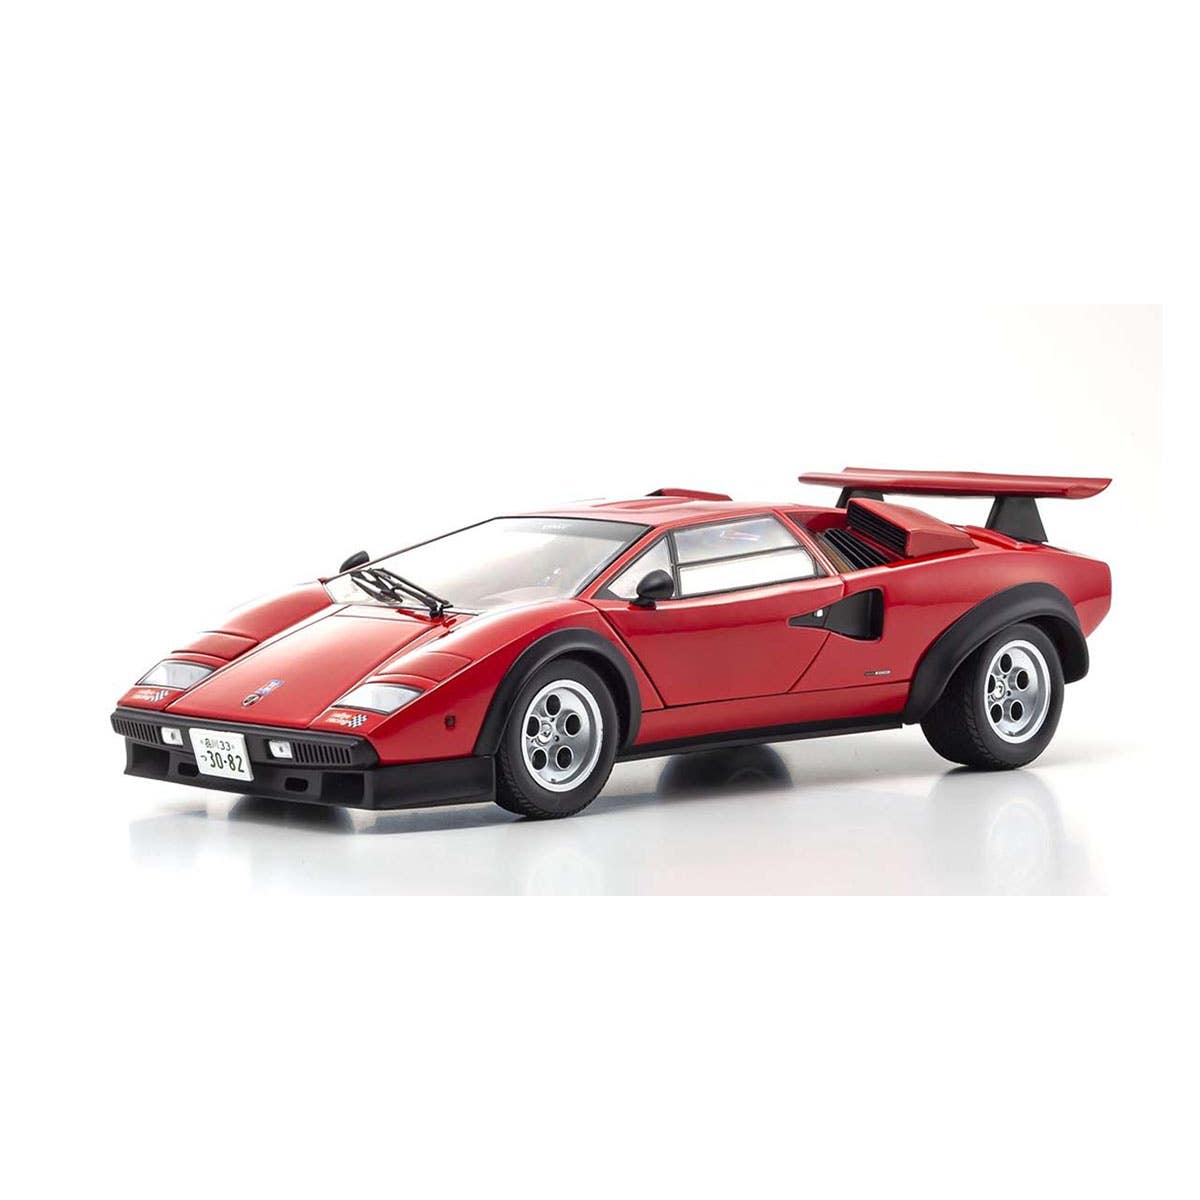 Lamborghini Countach Walter Wolf - Red - Product specification as identical to 08320A - 1:18 Scale Diecast Model Car